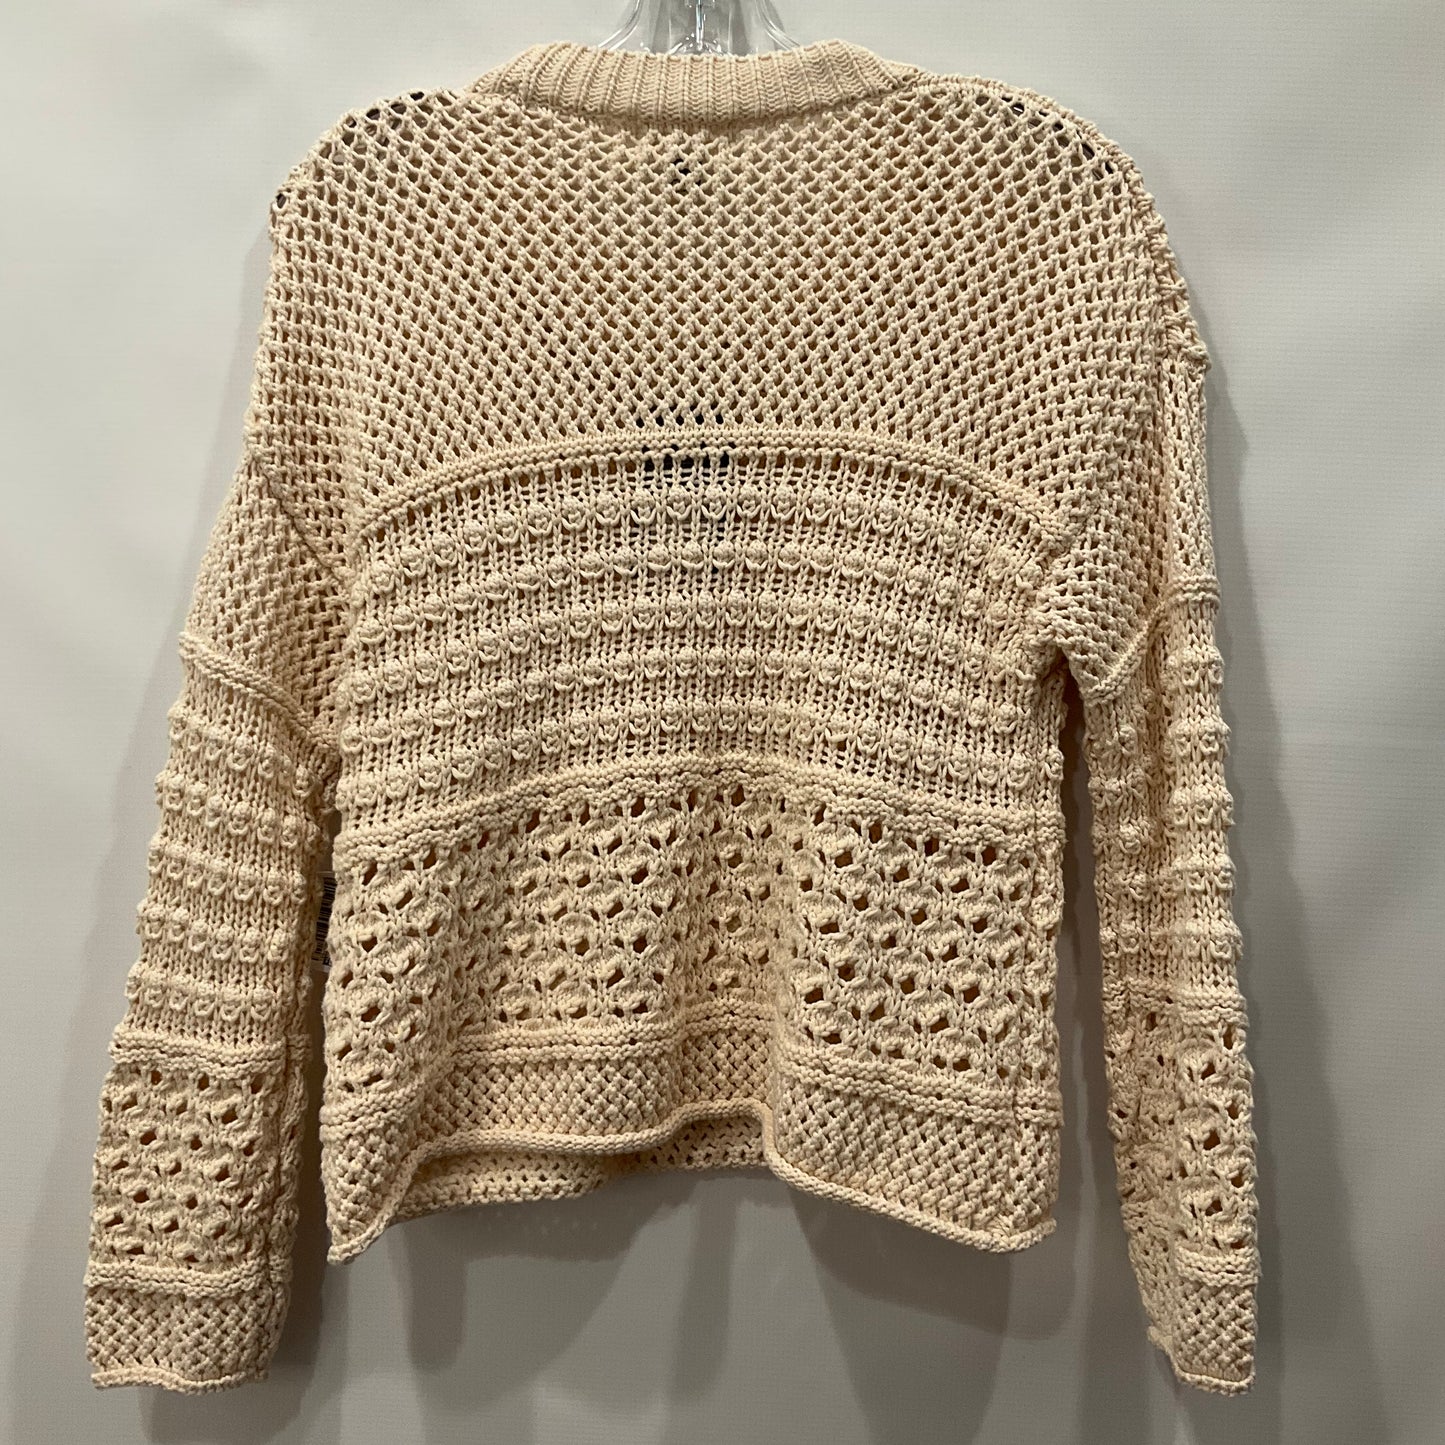 Sweater By Universal Thread  Size: Xs